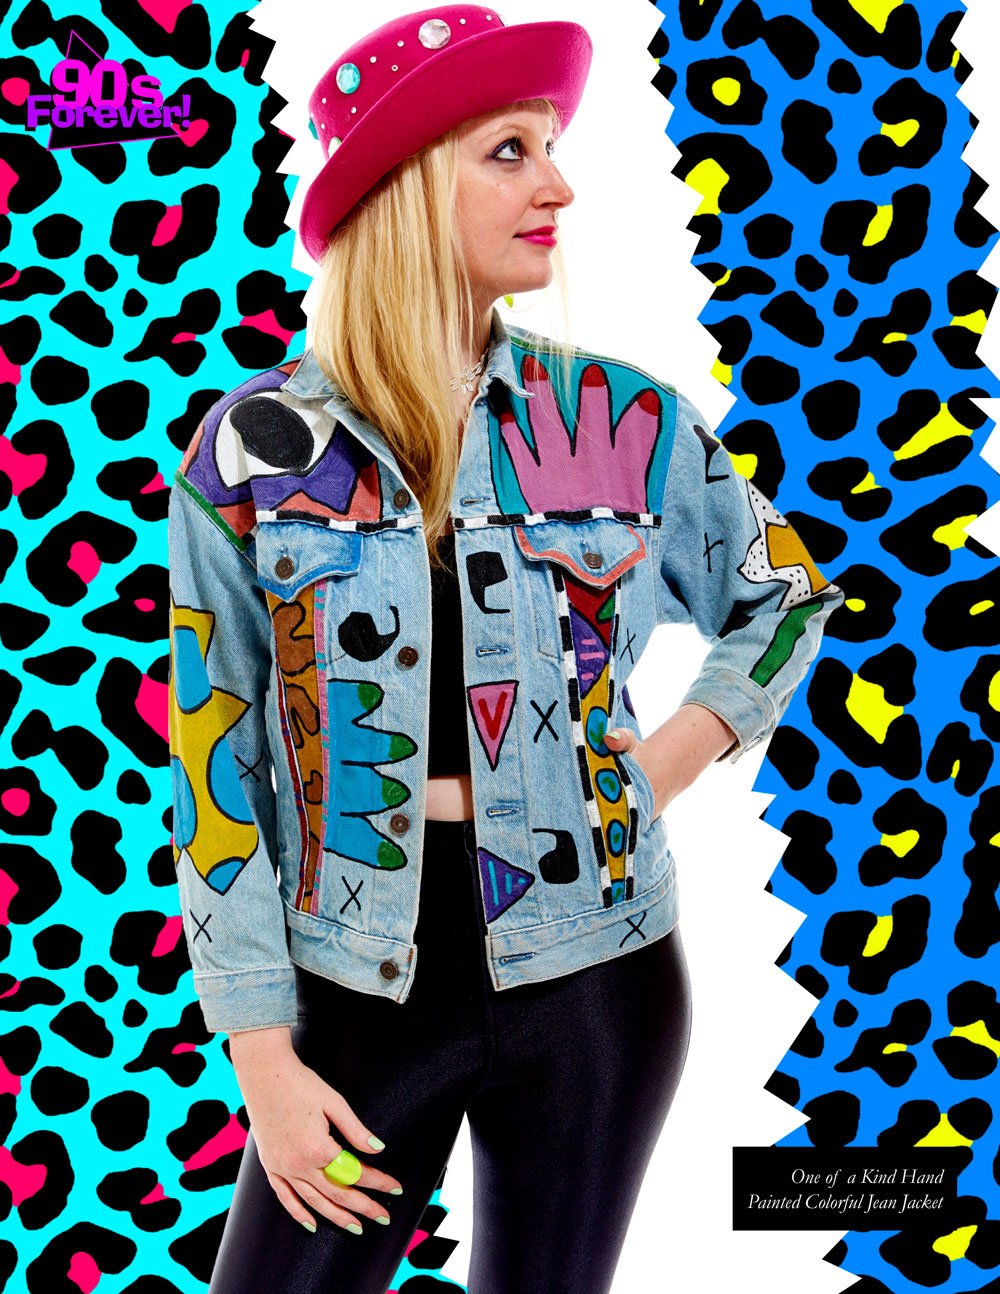 90s Forever Retro Vintage Fashion Apparel Lookbook - One of a Kind Hand Painted Colorful Jean Jacket